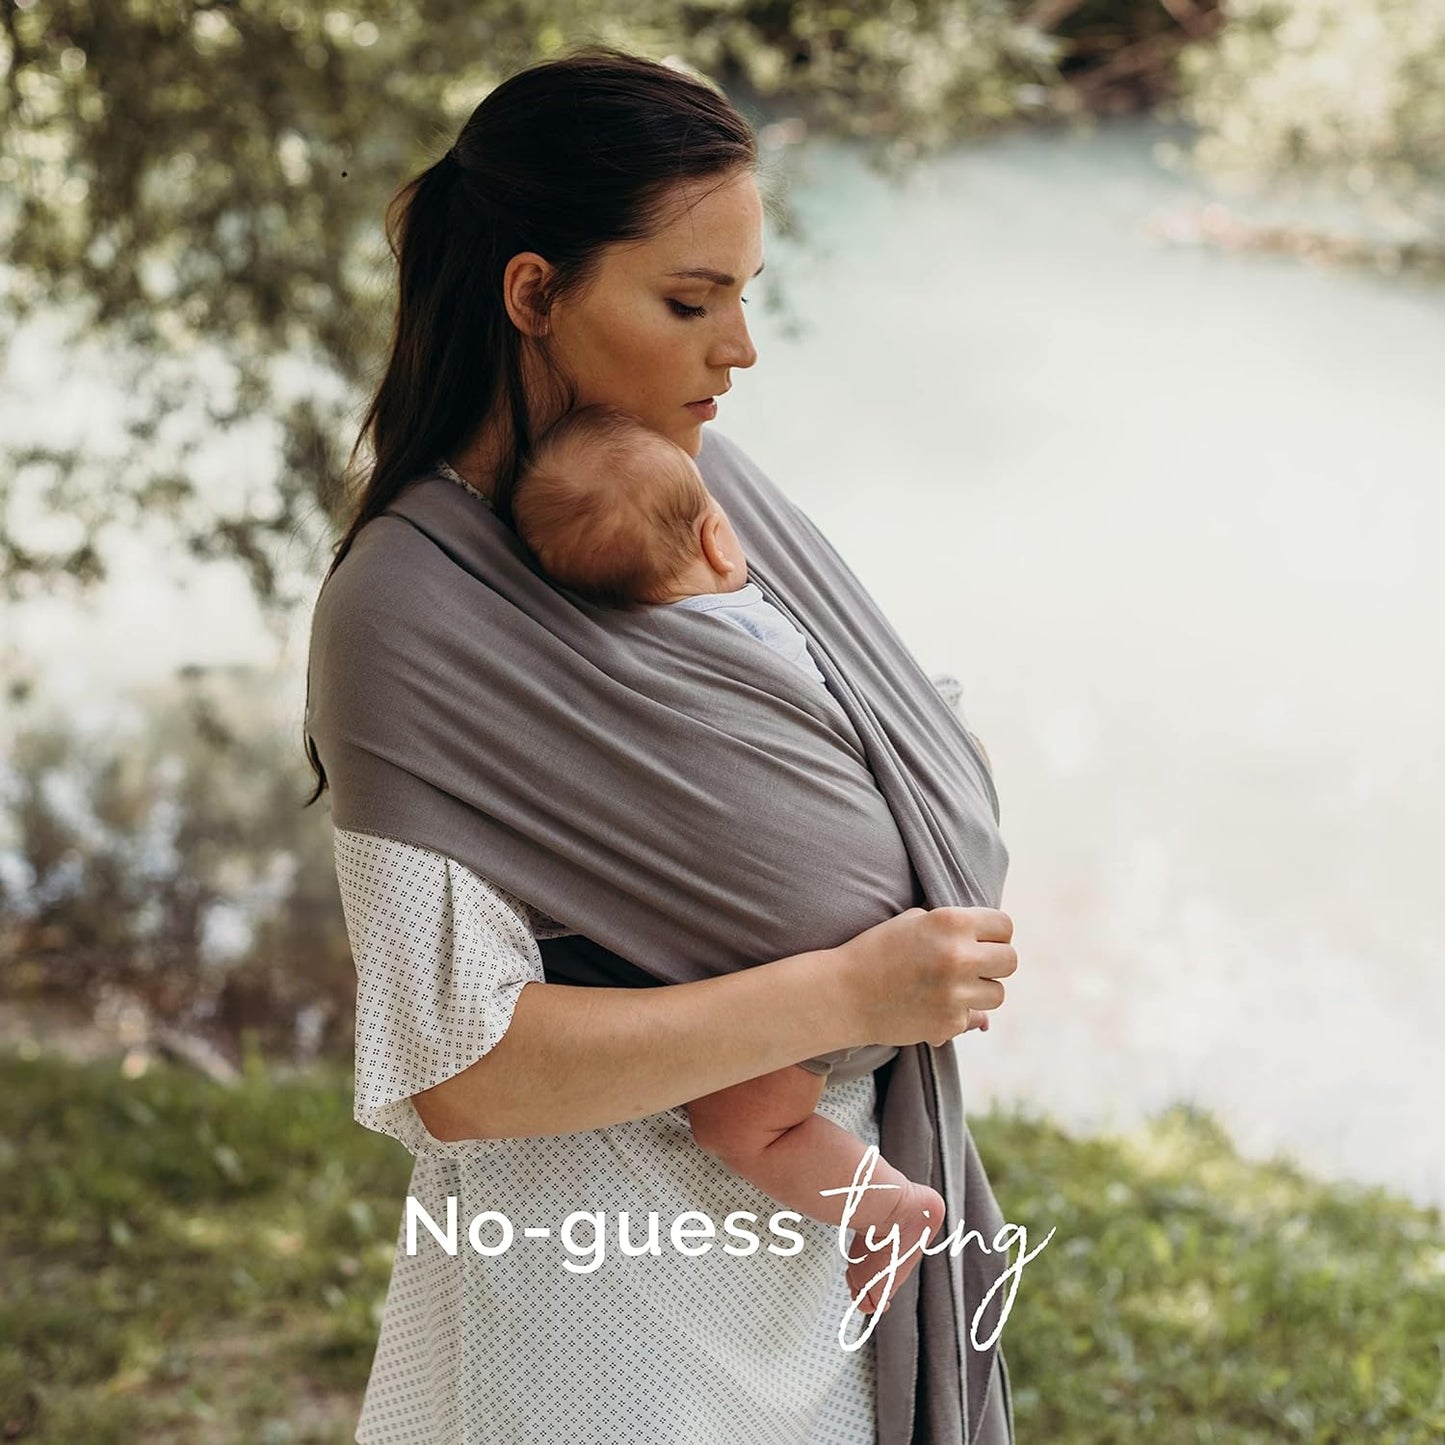 Boba Baby Wrap Carrier - Original Baby Carrier Wrap Sling for Newborns - Baby Wearing Essentials - Newborn Wrap Swaddle Holder, Newborn to Toddler Infant Sling (Grey)